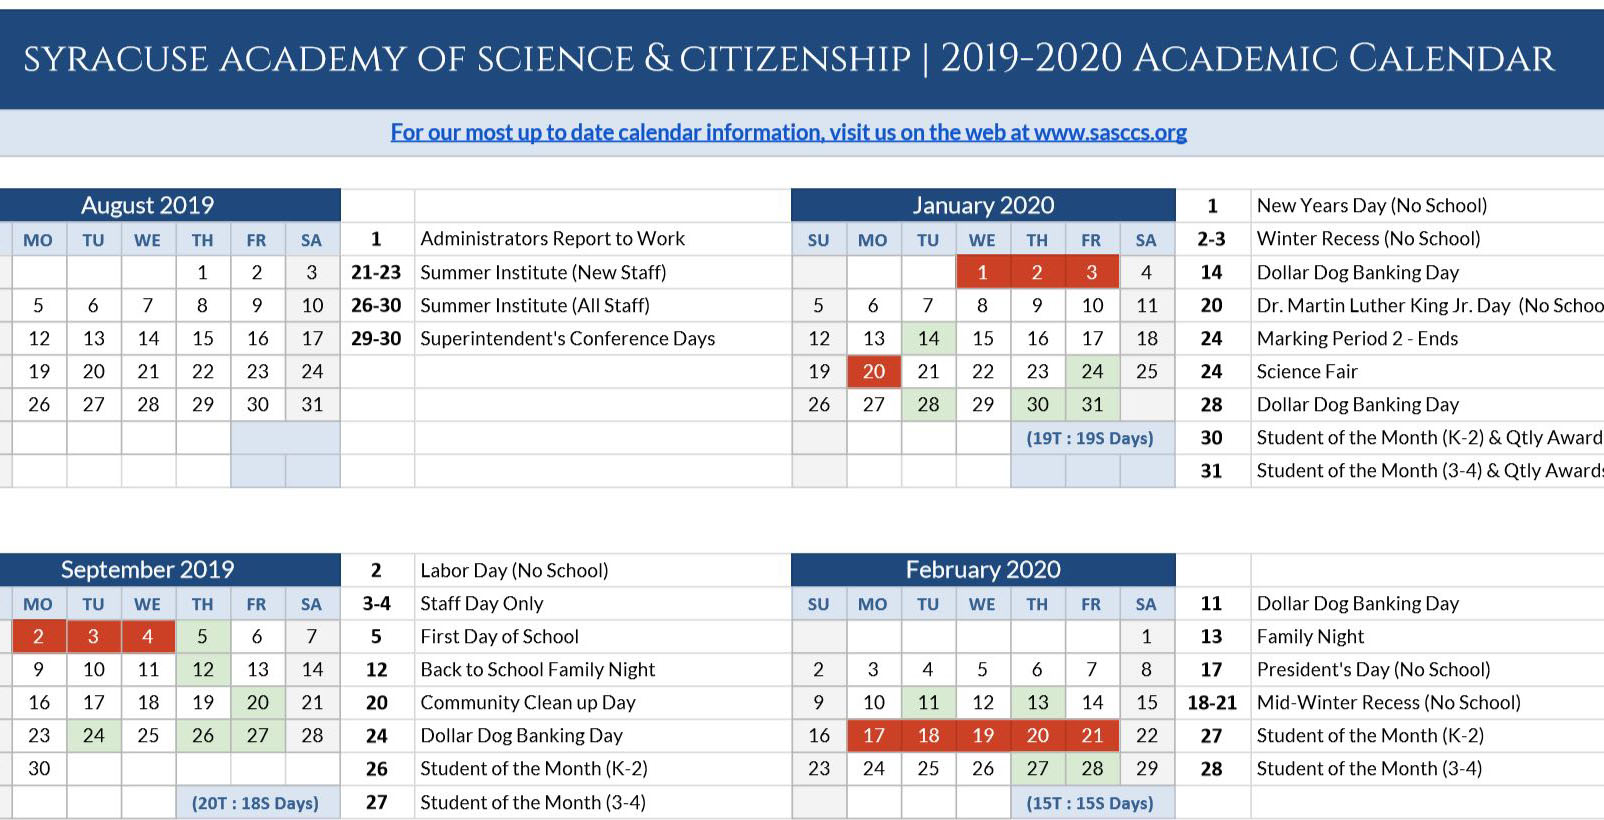 Visit the Academic Calendar page on our website to download a copy of the 2019 - 2020 Academic Calendar